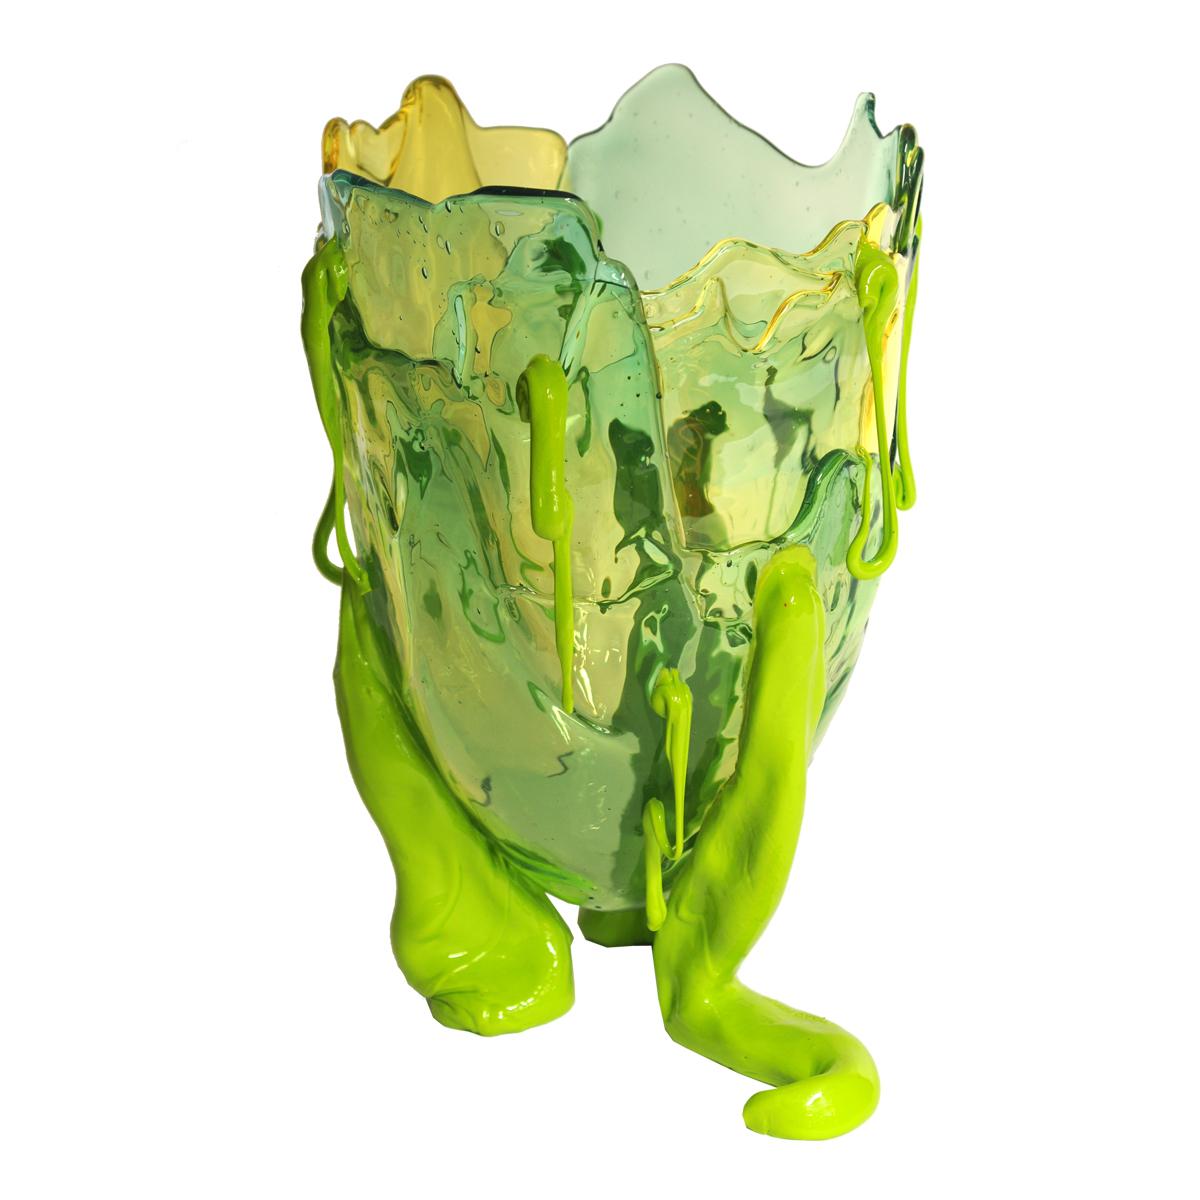 Clear special extra color vase - Clear yellow, matt lime, matt turquoise.

Vase in soft resin designed by Gaetano Pesce in 1995 for Fish Design collection.

Measures: M - ø 16cm x H 26cm

Other sizes available.
Colours: Clear yellow, matt